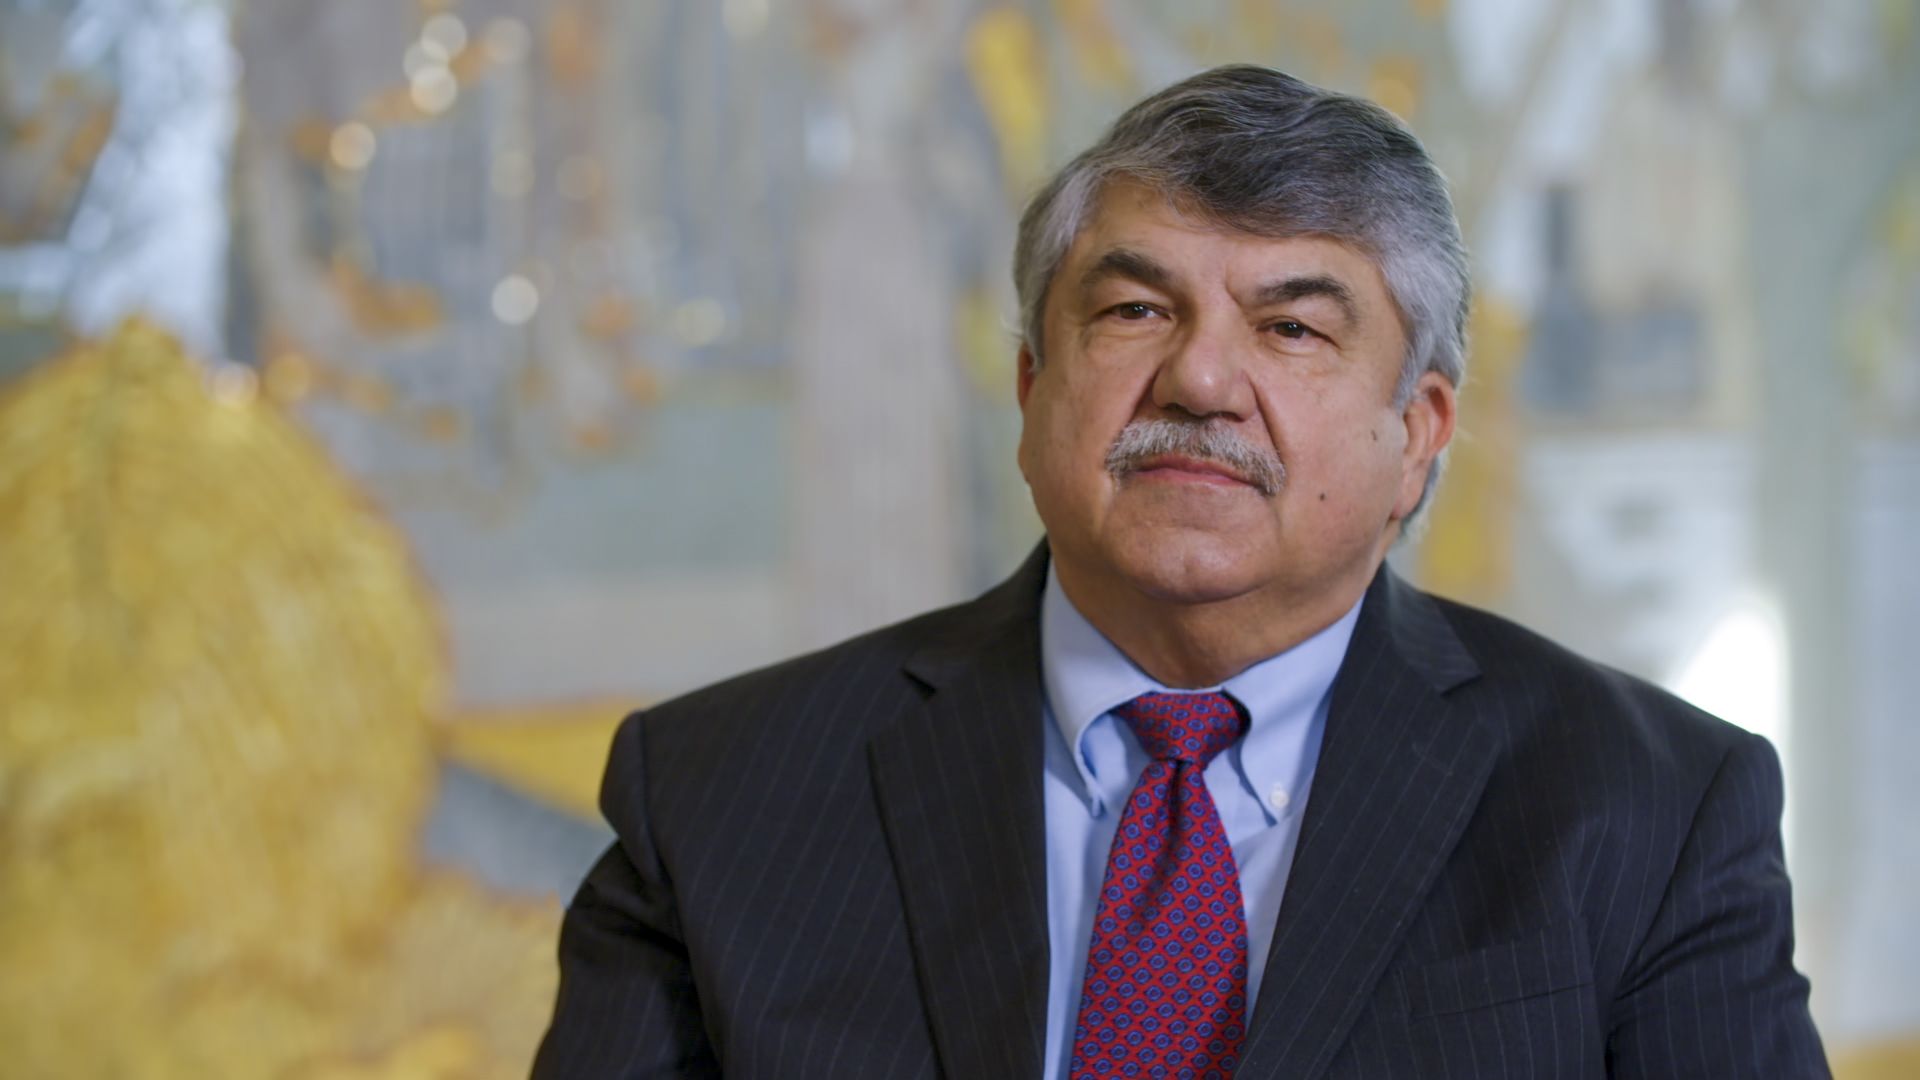 AFL-CIO President Richard Trumka is seen during an interview for 